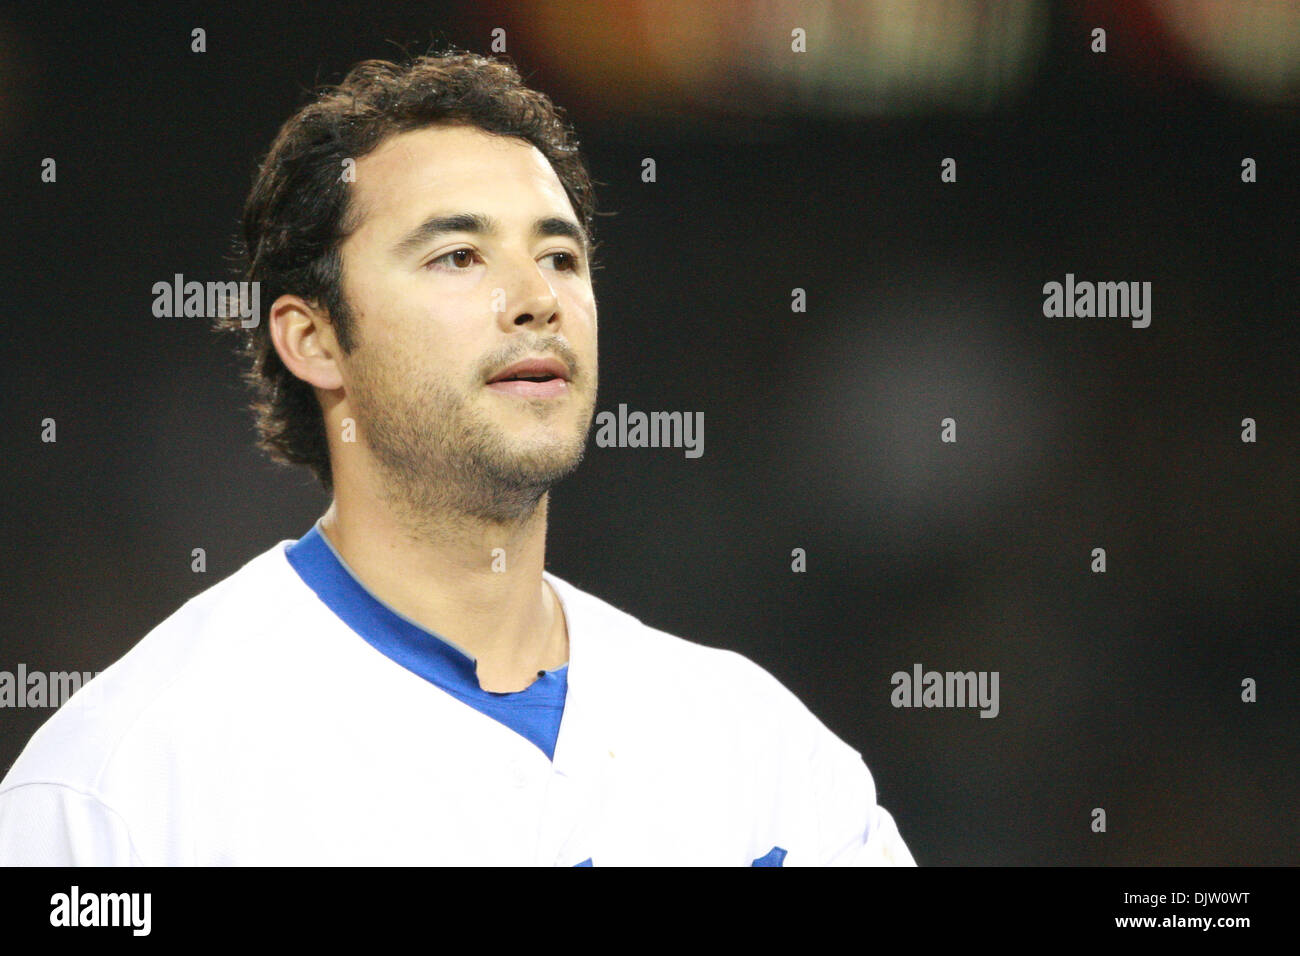 Andre ethier hi-res stock photography and images - Alamy